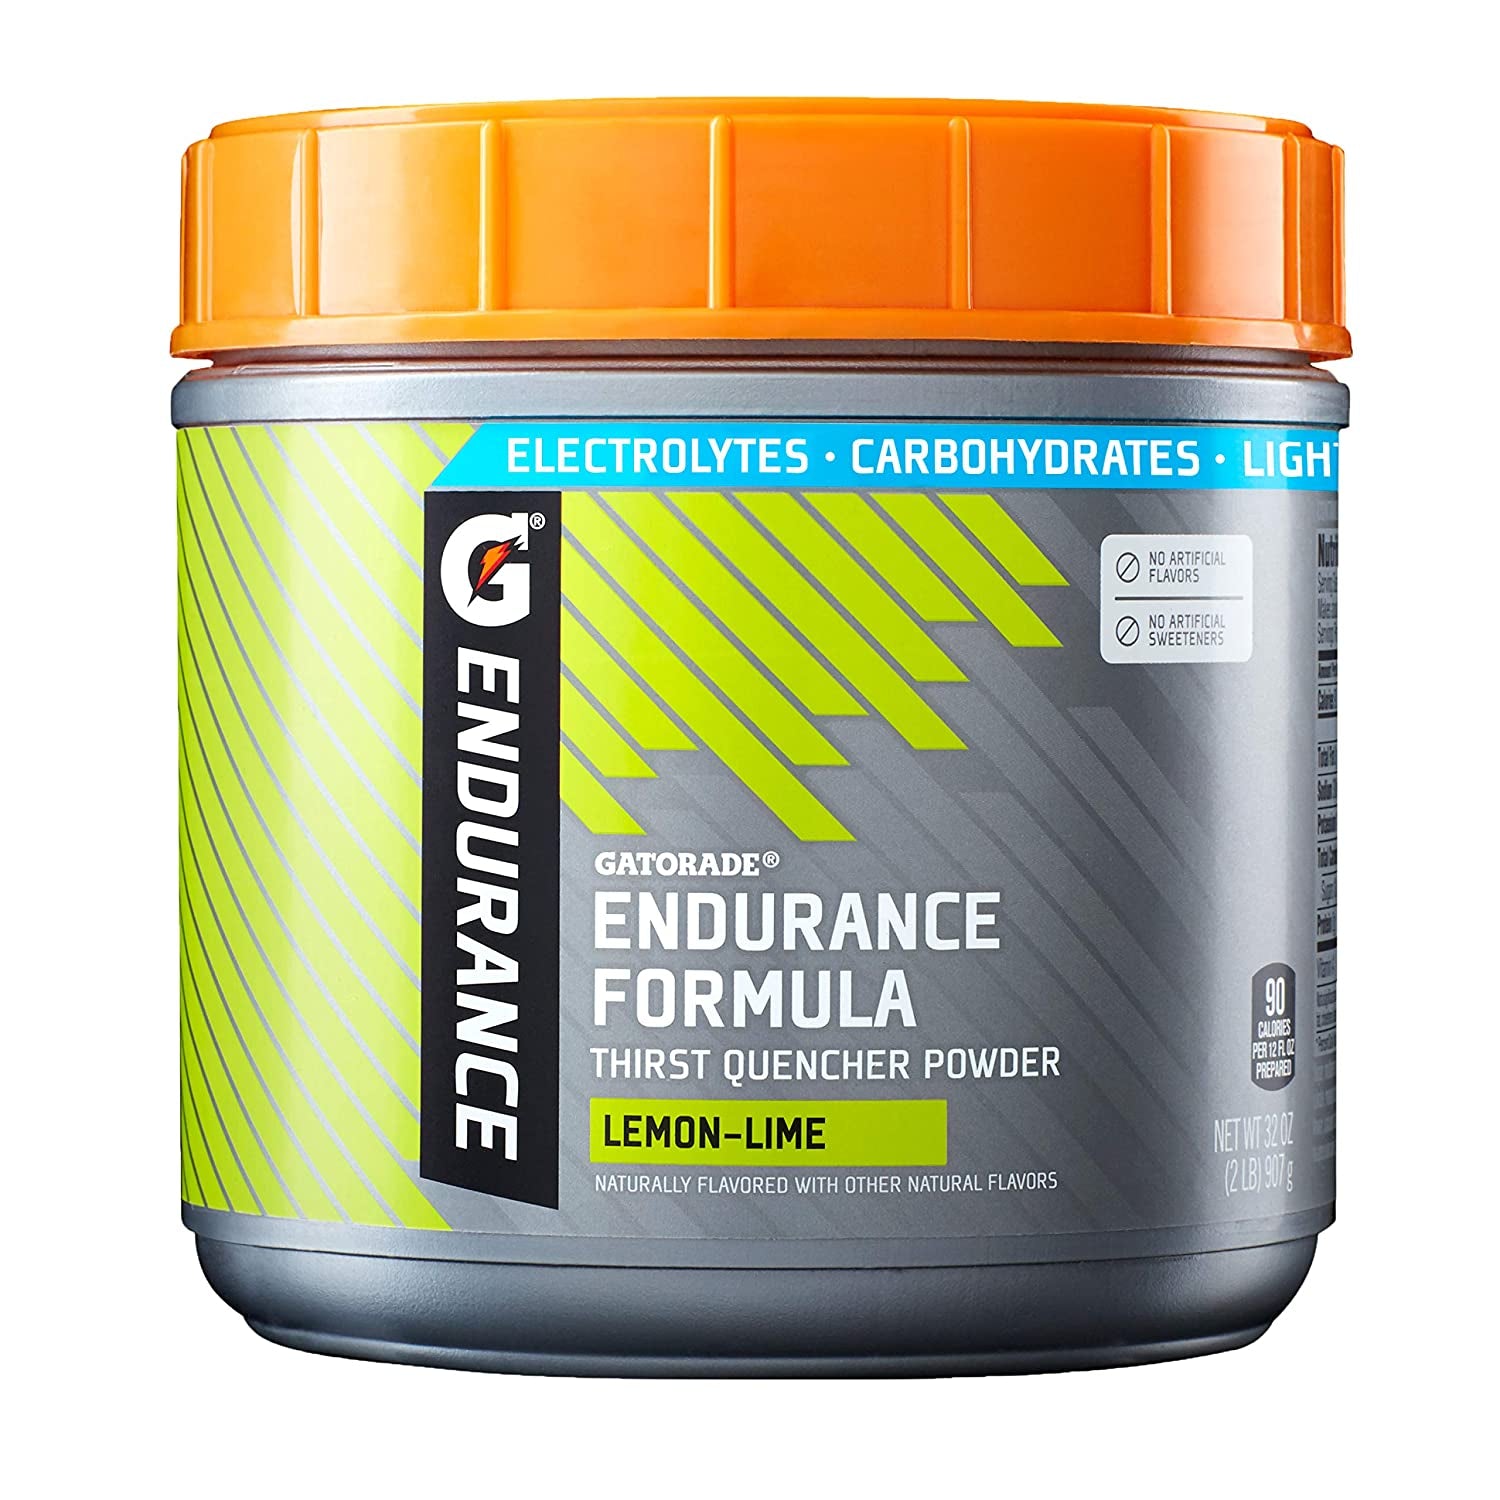 "Boost Your Performance with Gatorade Endurance Formula Powder - Energizing Orange Flavor - 32 Ounce (Pack of 1)"